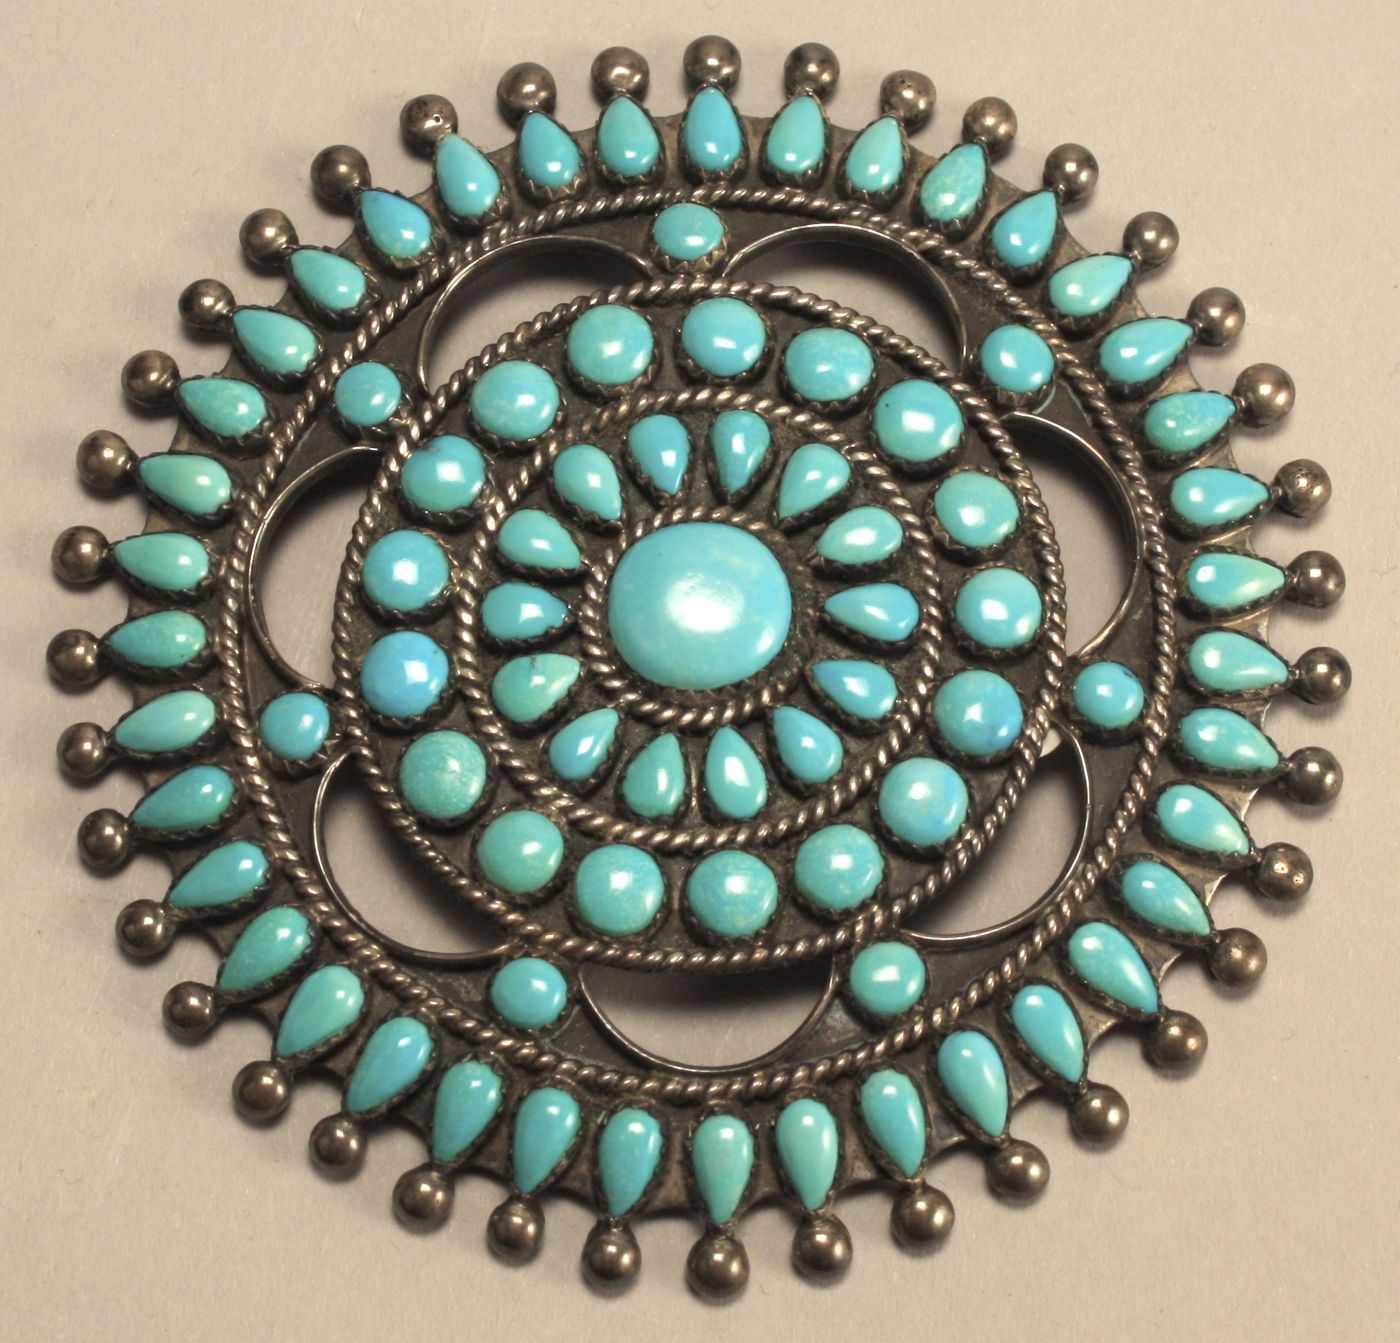 NAVAJO SILVER AND TURQUOISE BROOCHBy 14a7ed